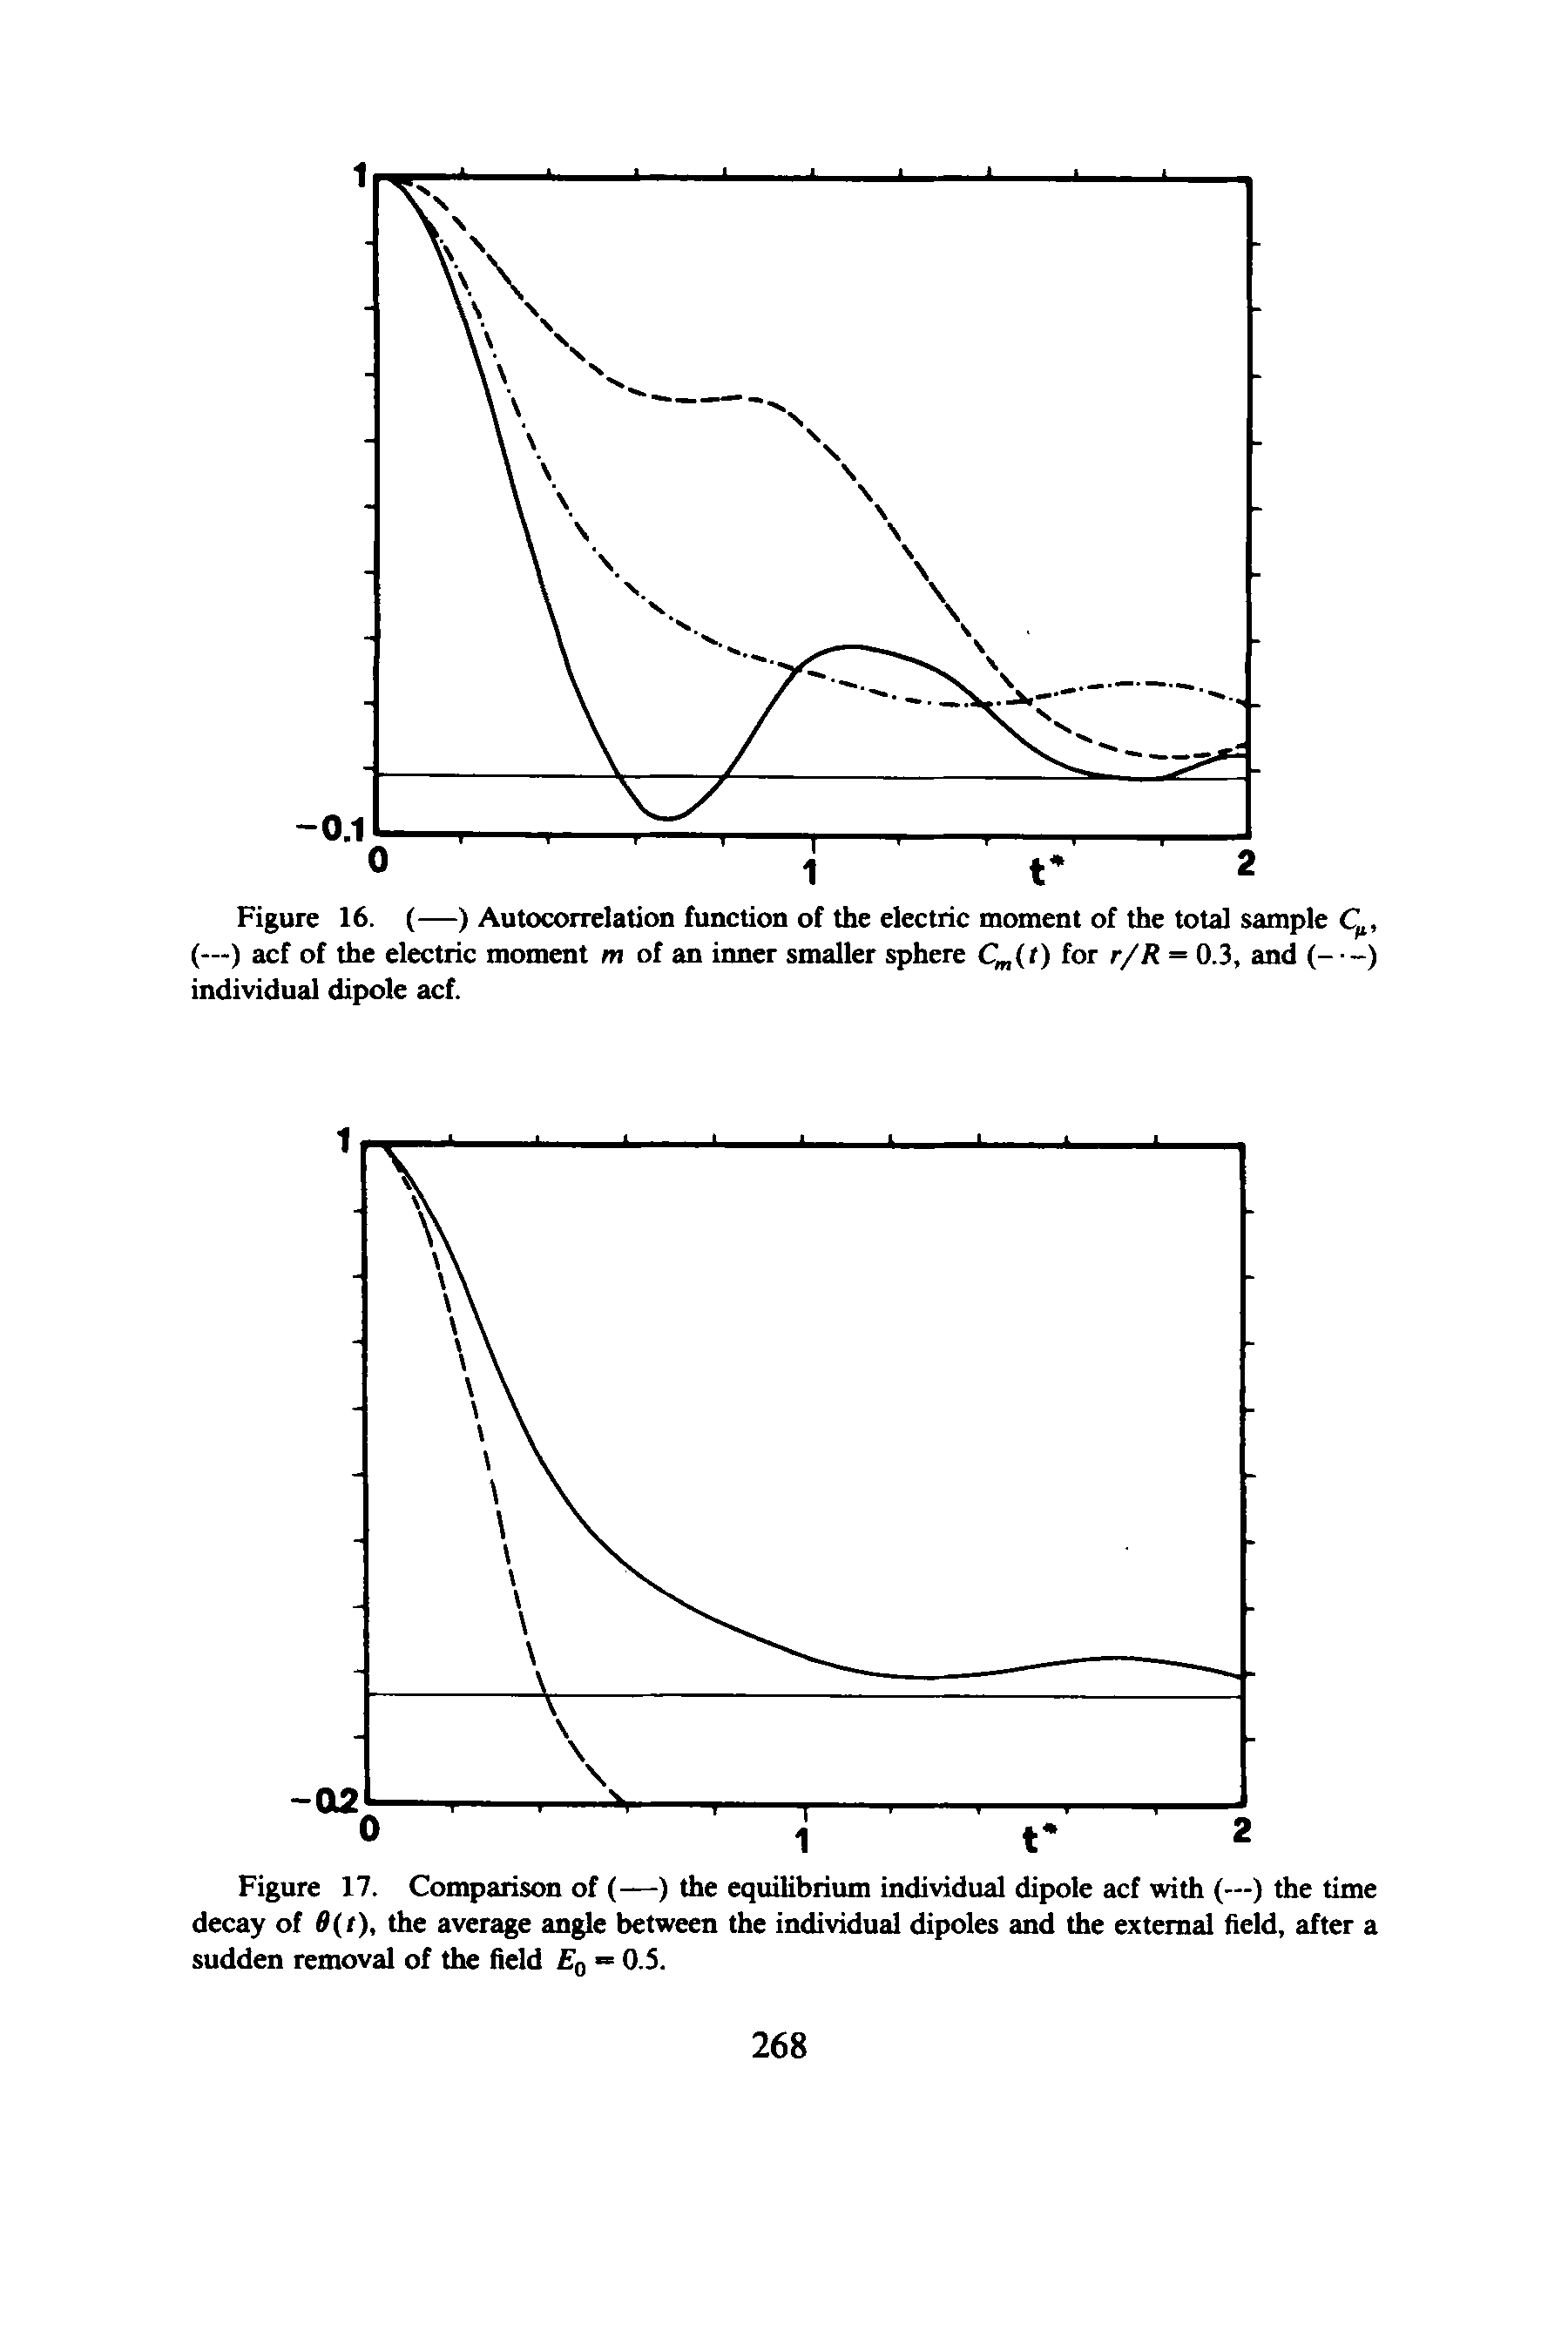 Figure 17. Comparison of (—) the equilibrium individual dipole acf with (—) the time decay of 8(t), the average angle between the individual dipoles and the external held, after a...